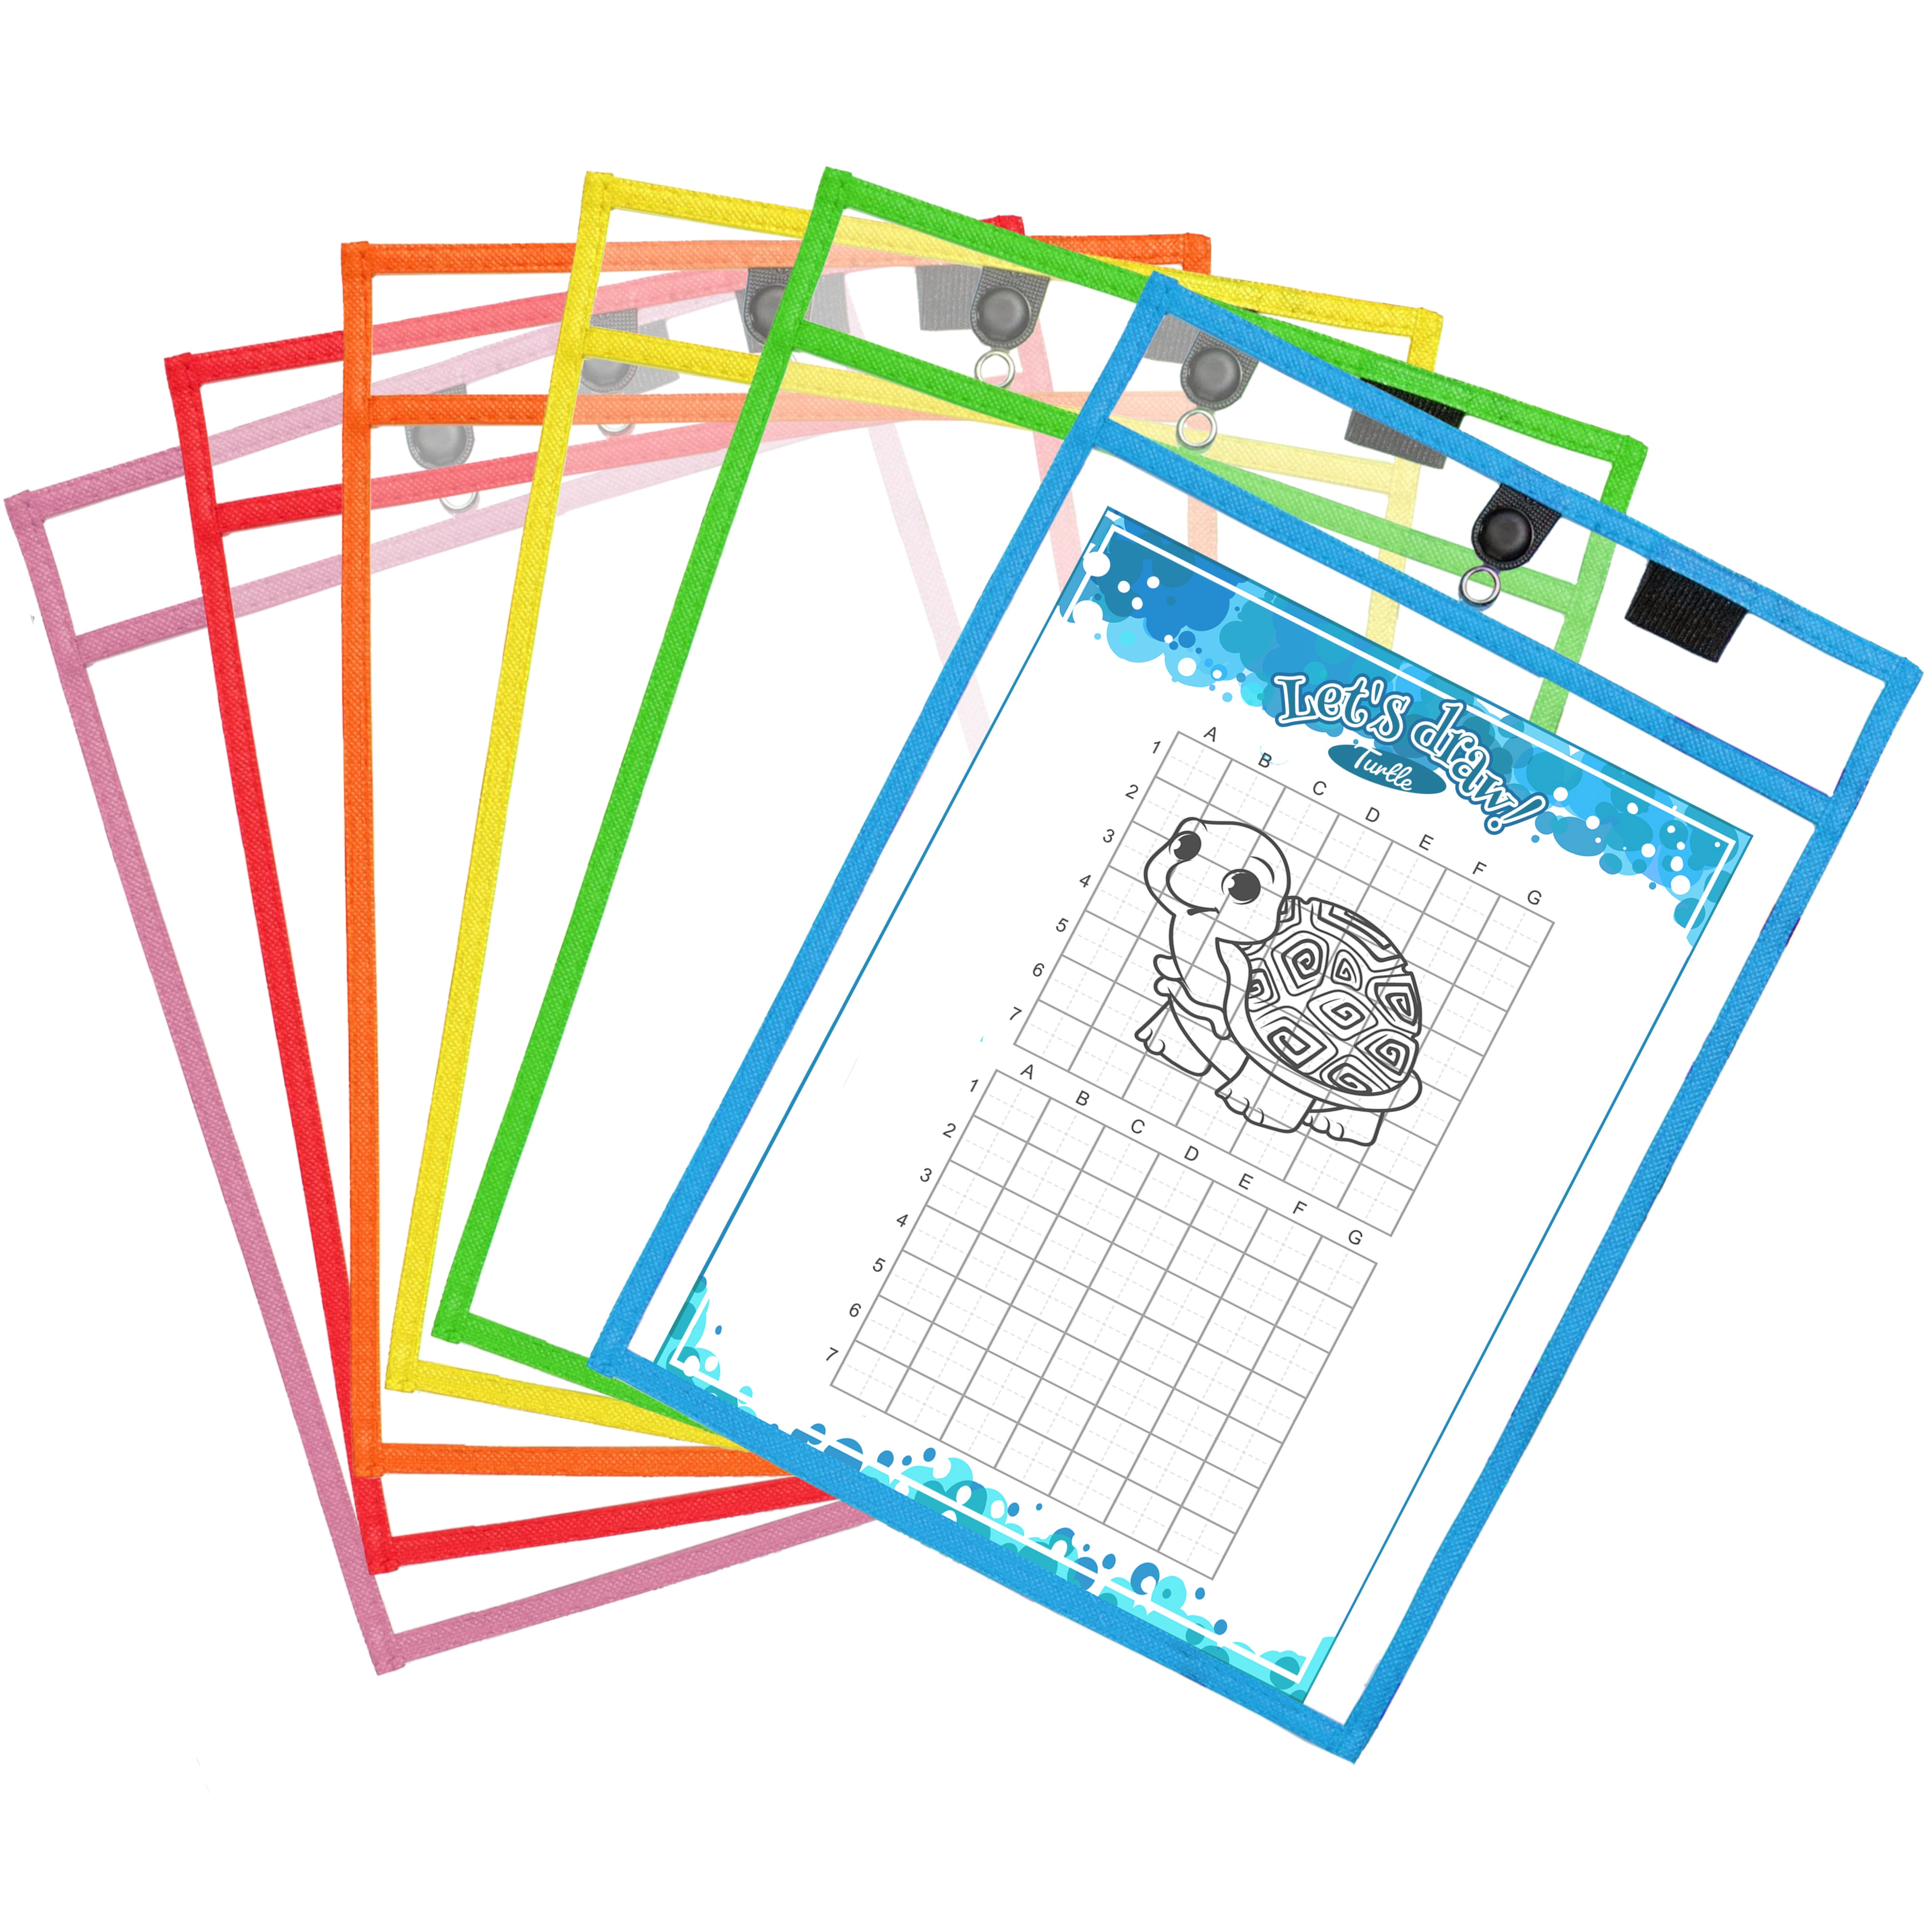 Magnetic Dry Erase Pockets by Two Point (6-Pack) - Plastic Sleeves |  Teaching Supplies | Dry Erase Sheets | Dry Erase Sleeves | School Supplies  for